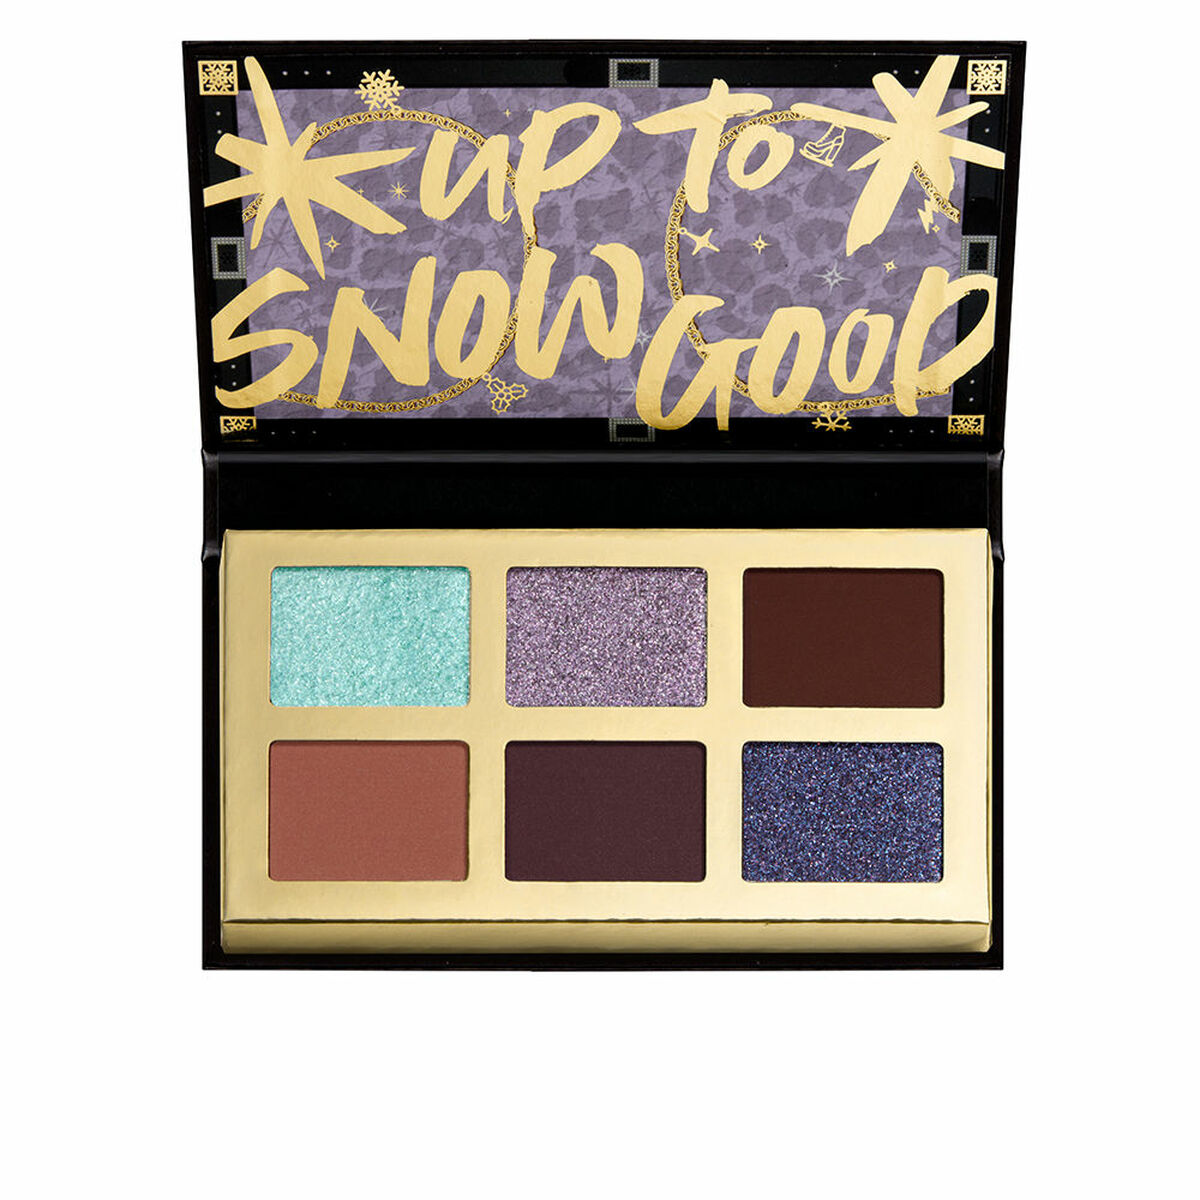 NYX Up to Snow Good Eye Shadow Palette Limited Edition (6 g)